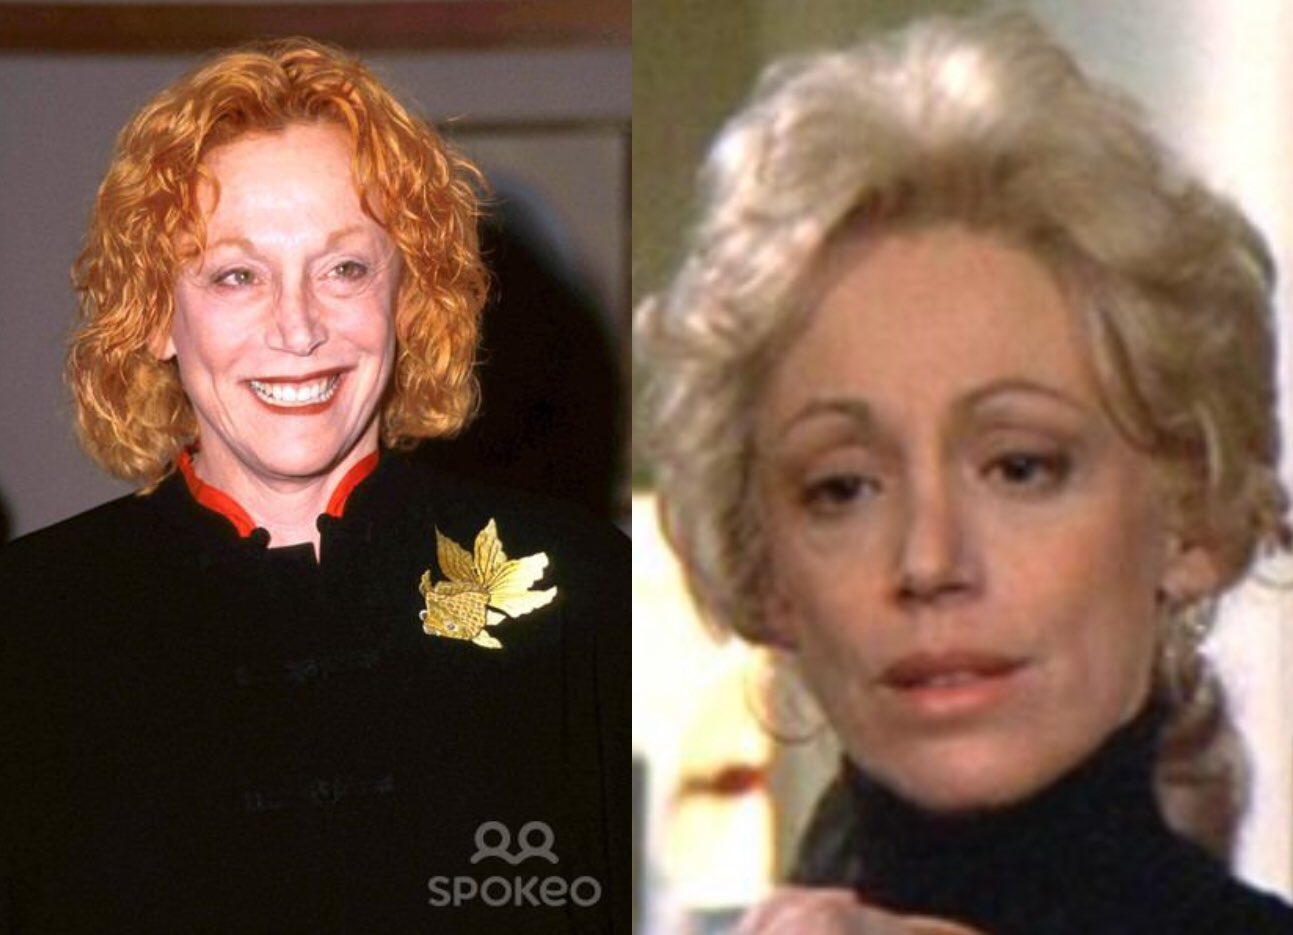 Happy 83rd Birthday to Lorraine Gary! The actress who played Ellen Brody in the Jaws movies. 